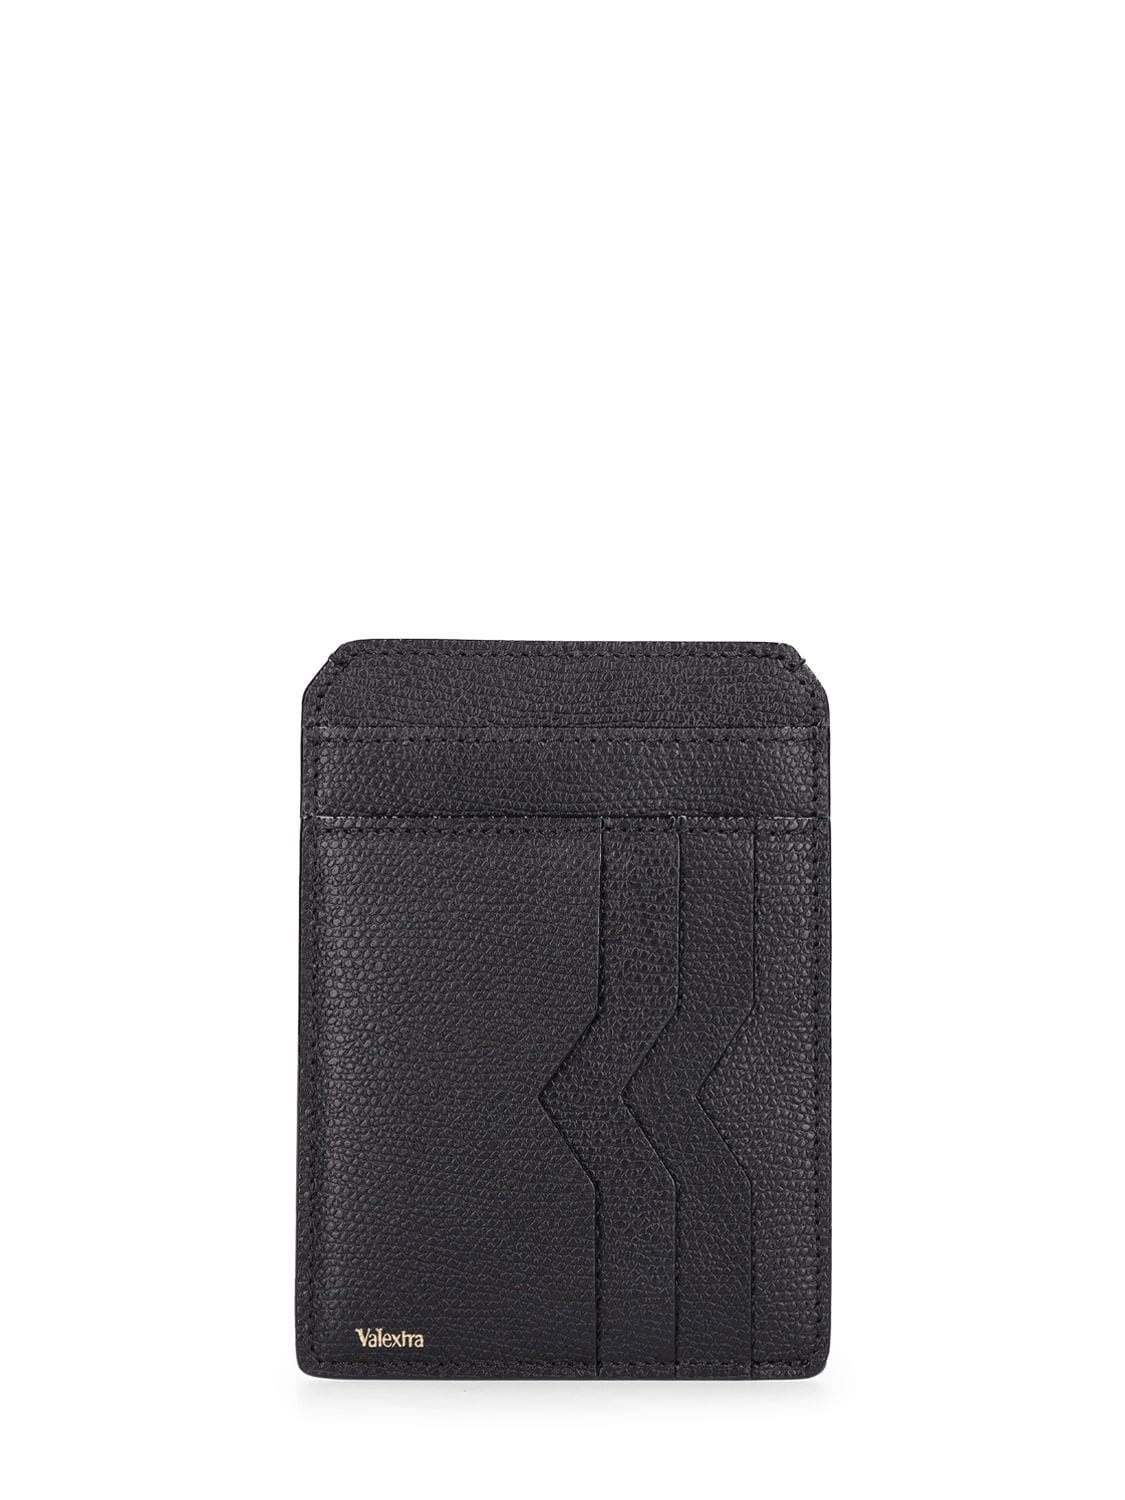 Valextra Leather Credit Card Holder In Black